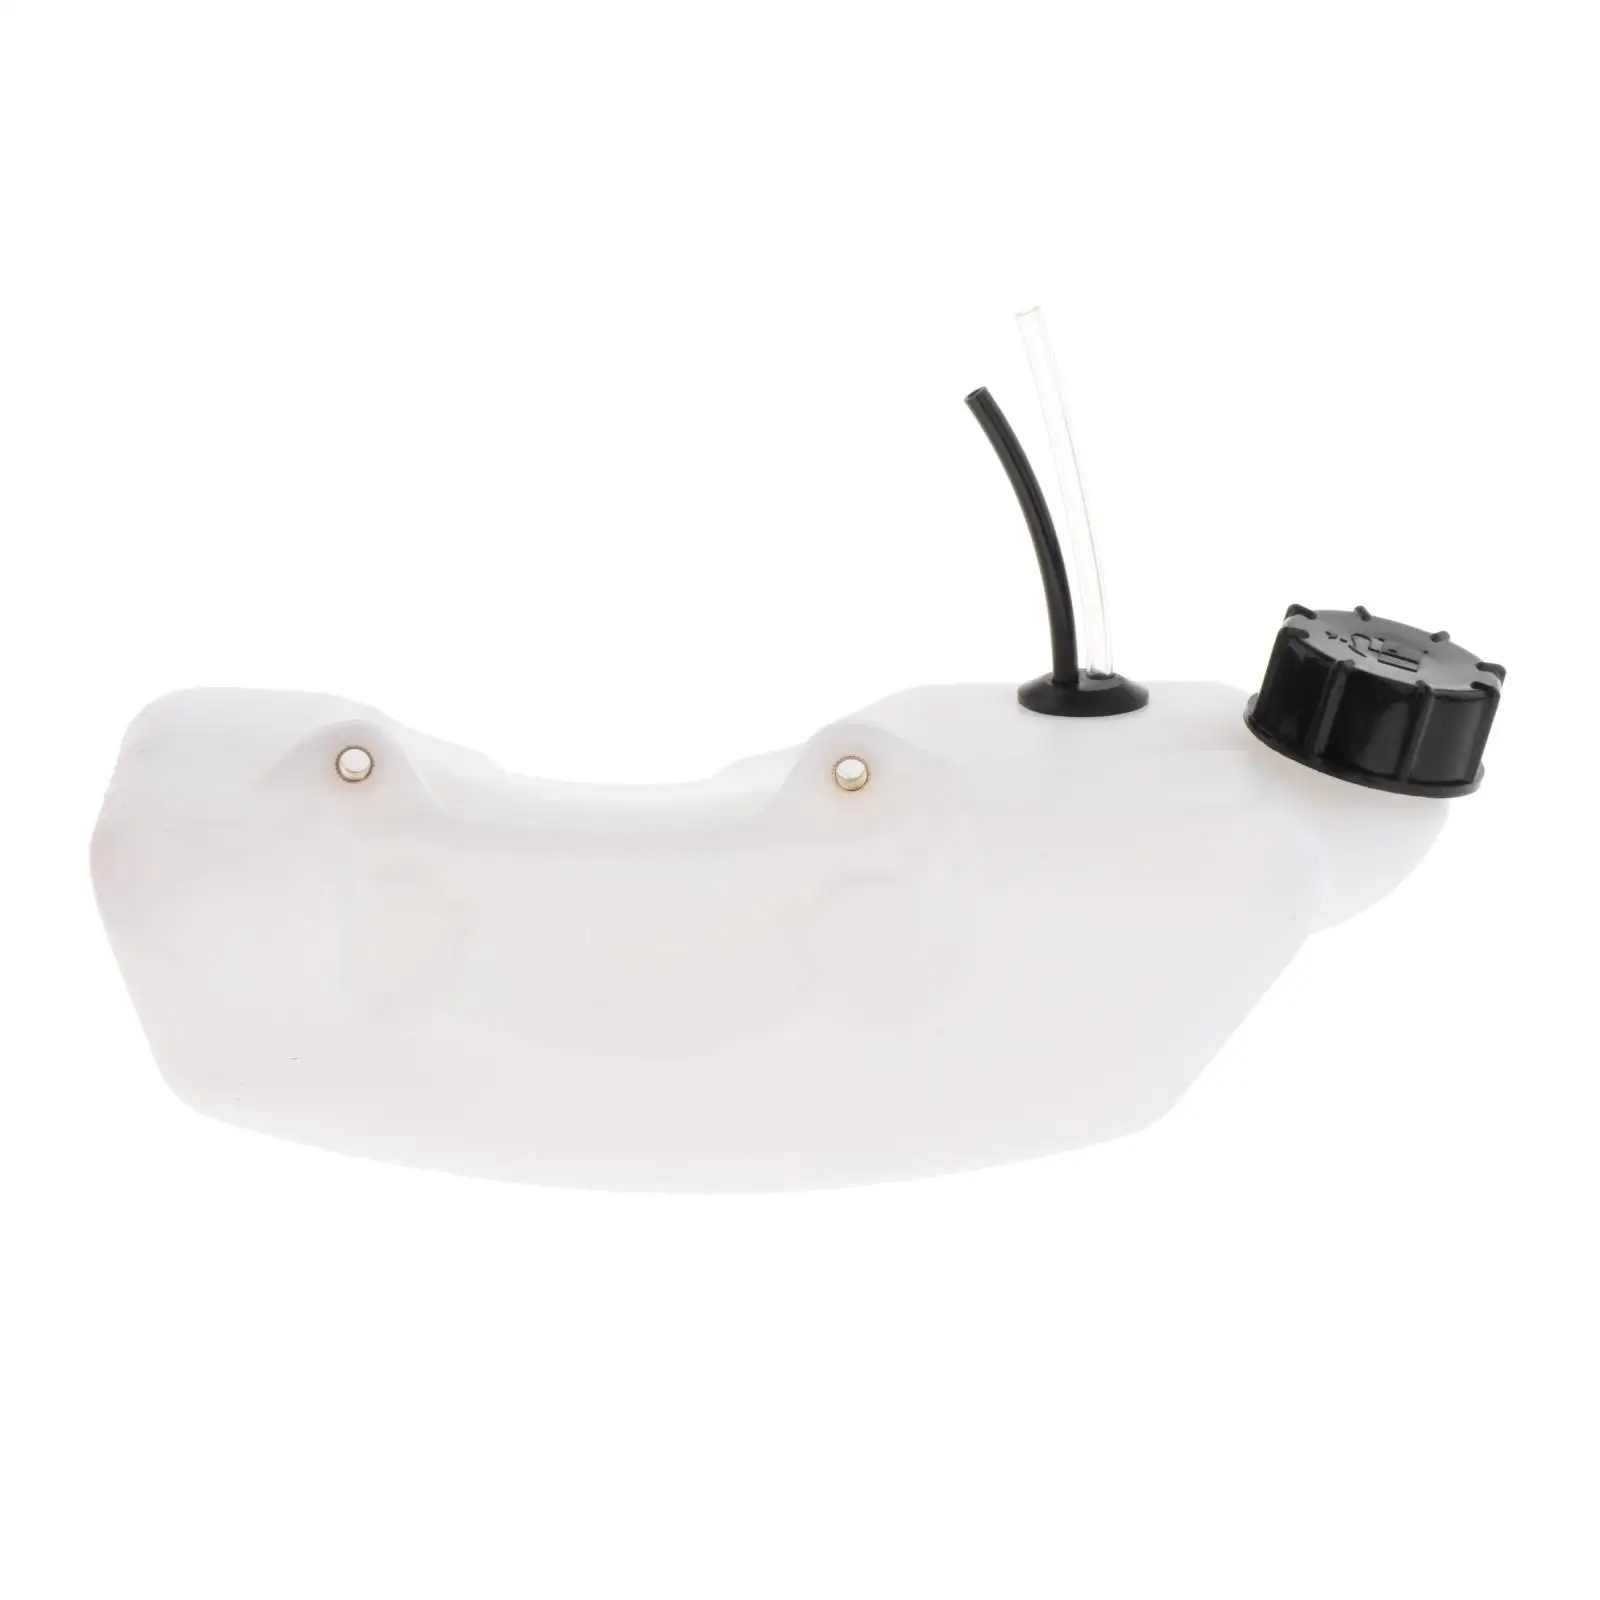 Fuel Tank Assembly for Brush Cutter 40-5 43cc, Long Durability Part Accessory Professional